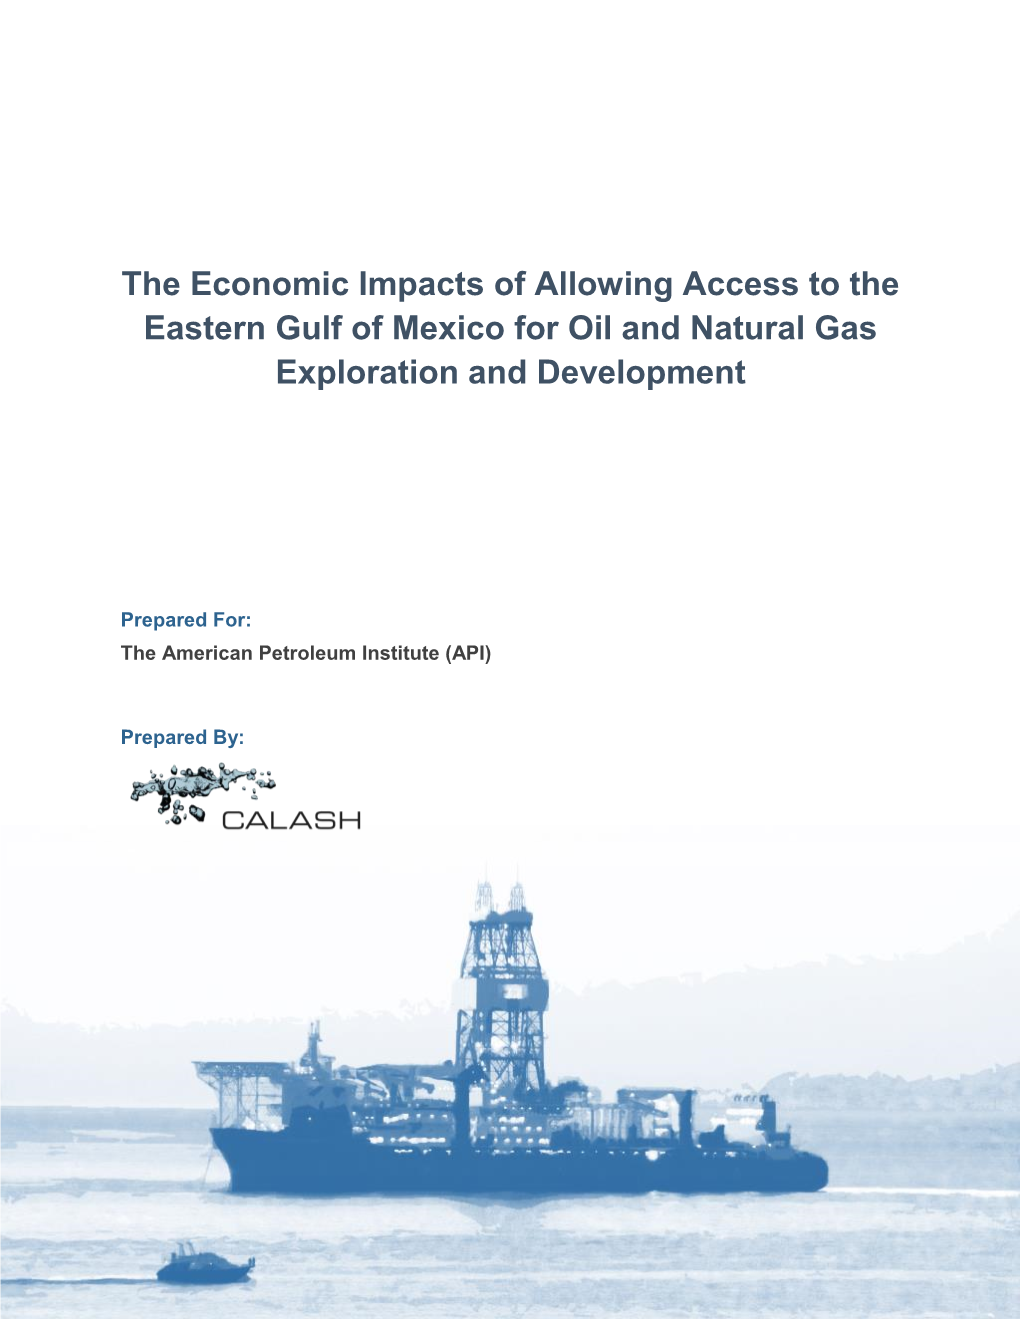 The Economic Impacts of Allowing Access to the Eastern Gulf of Mexico for Oil and Natural Gas Exploration and Development